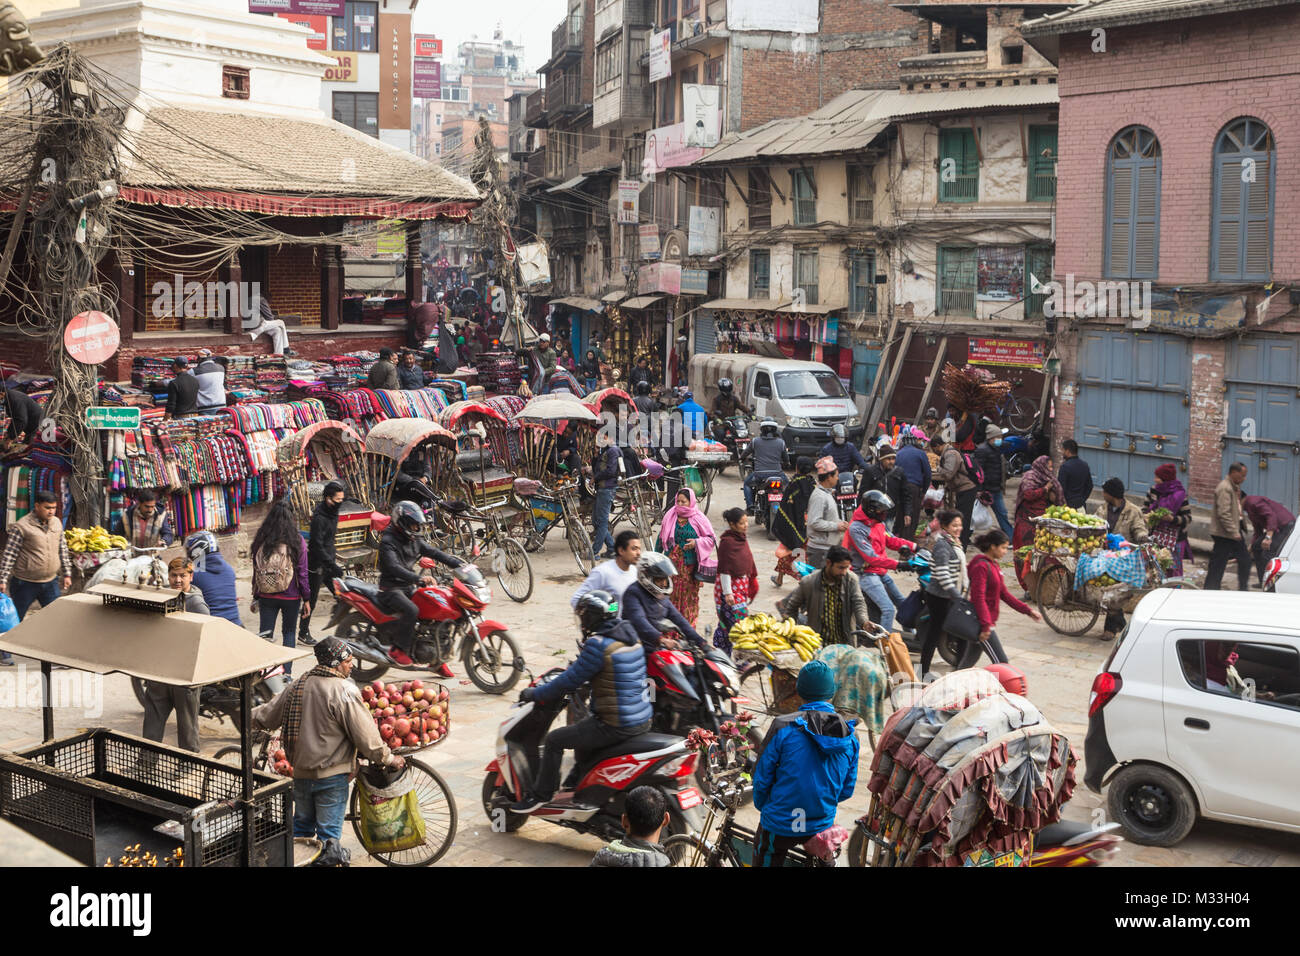 Kathmandu, Nepal - December 20 2017: Traffic of cars, rickshaws and people move in the chaotic streets of Kathmandu at the Indra Chowk intersection in Stock Photo